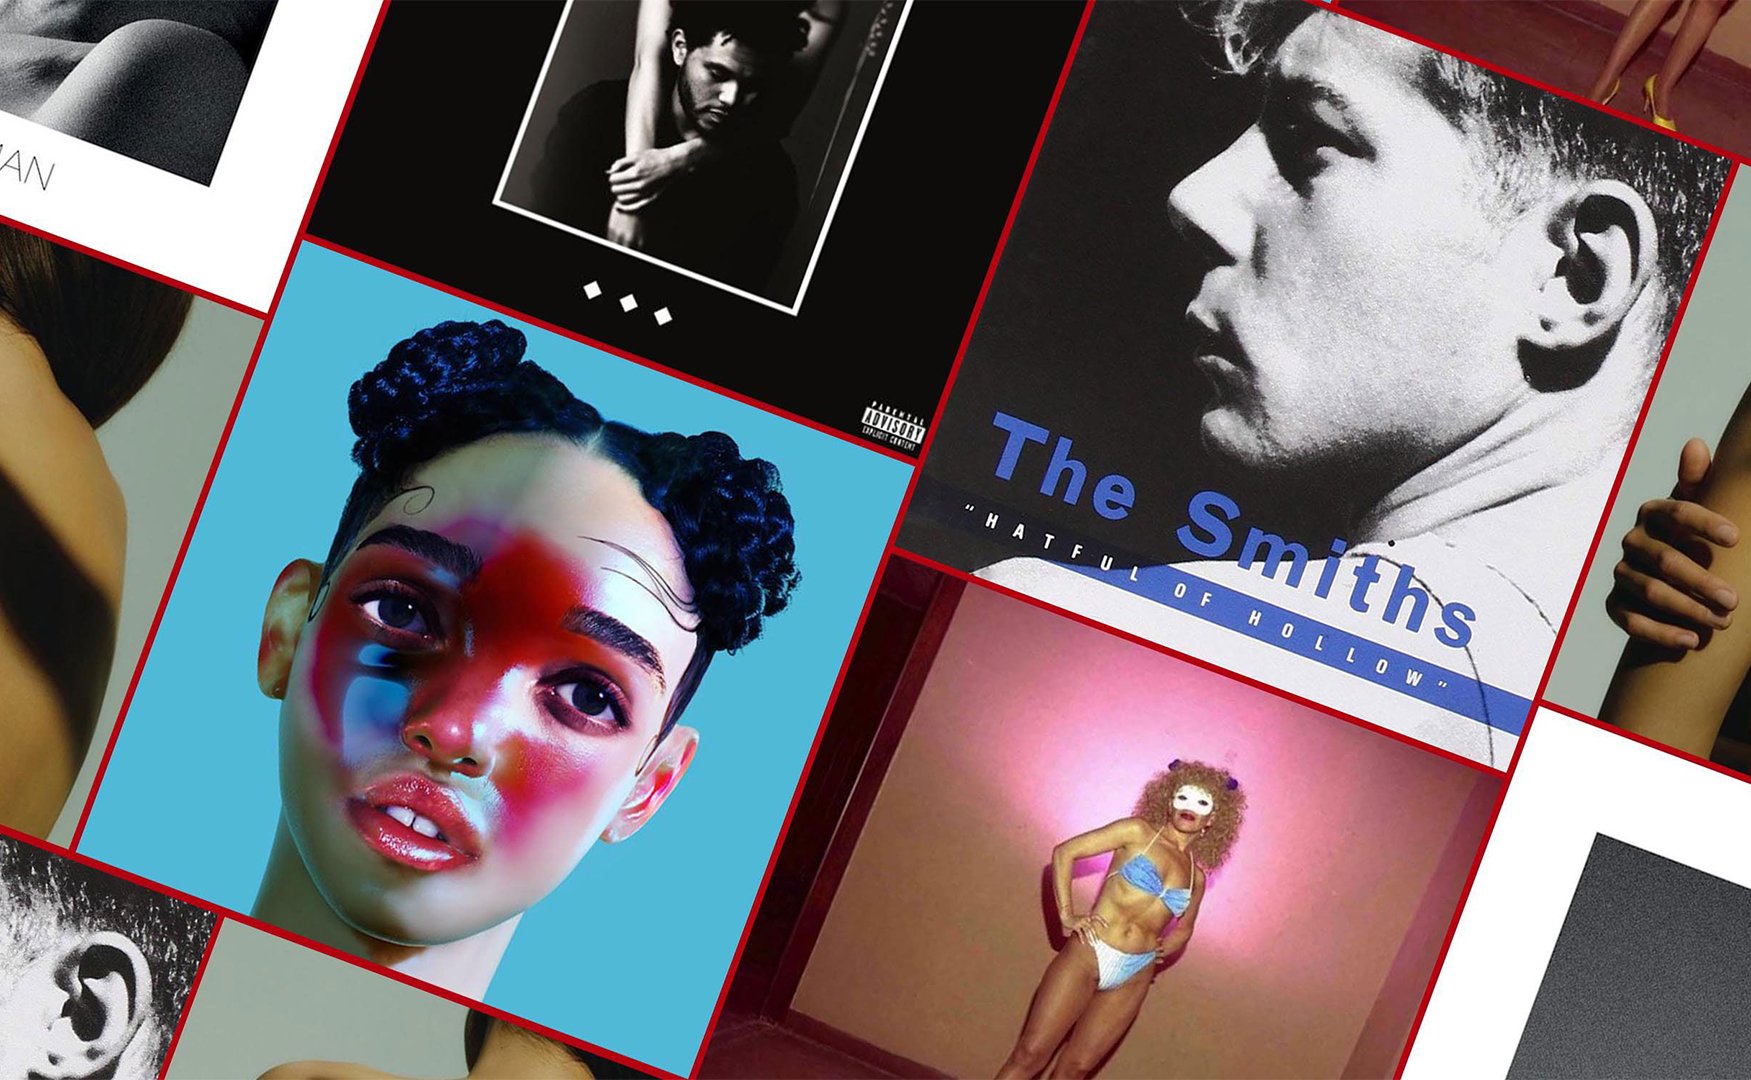 The ultimate sex playlist – choosing the best music for getting it on